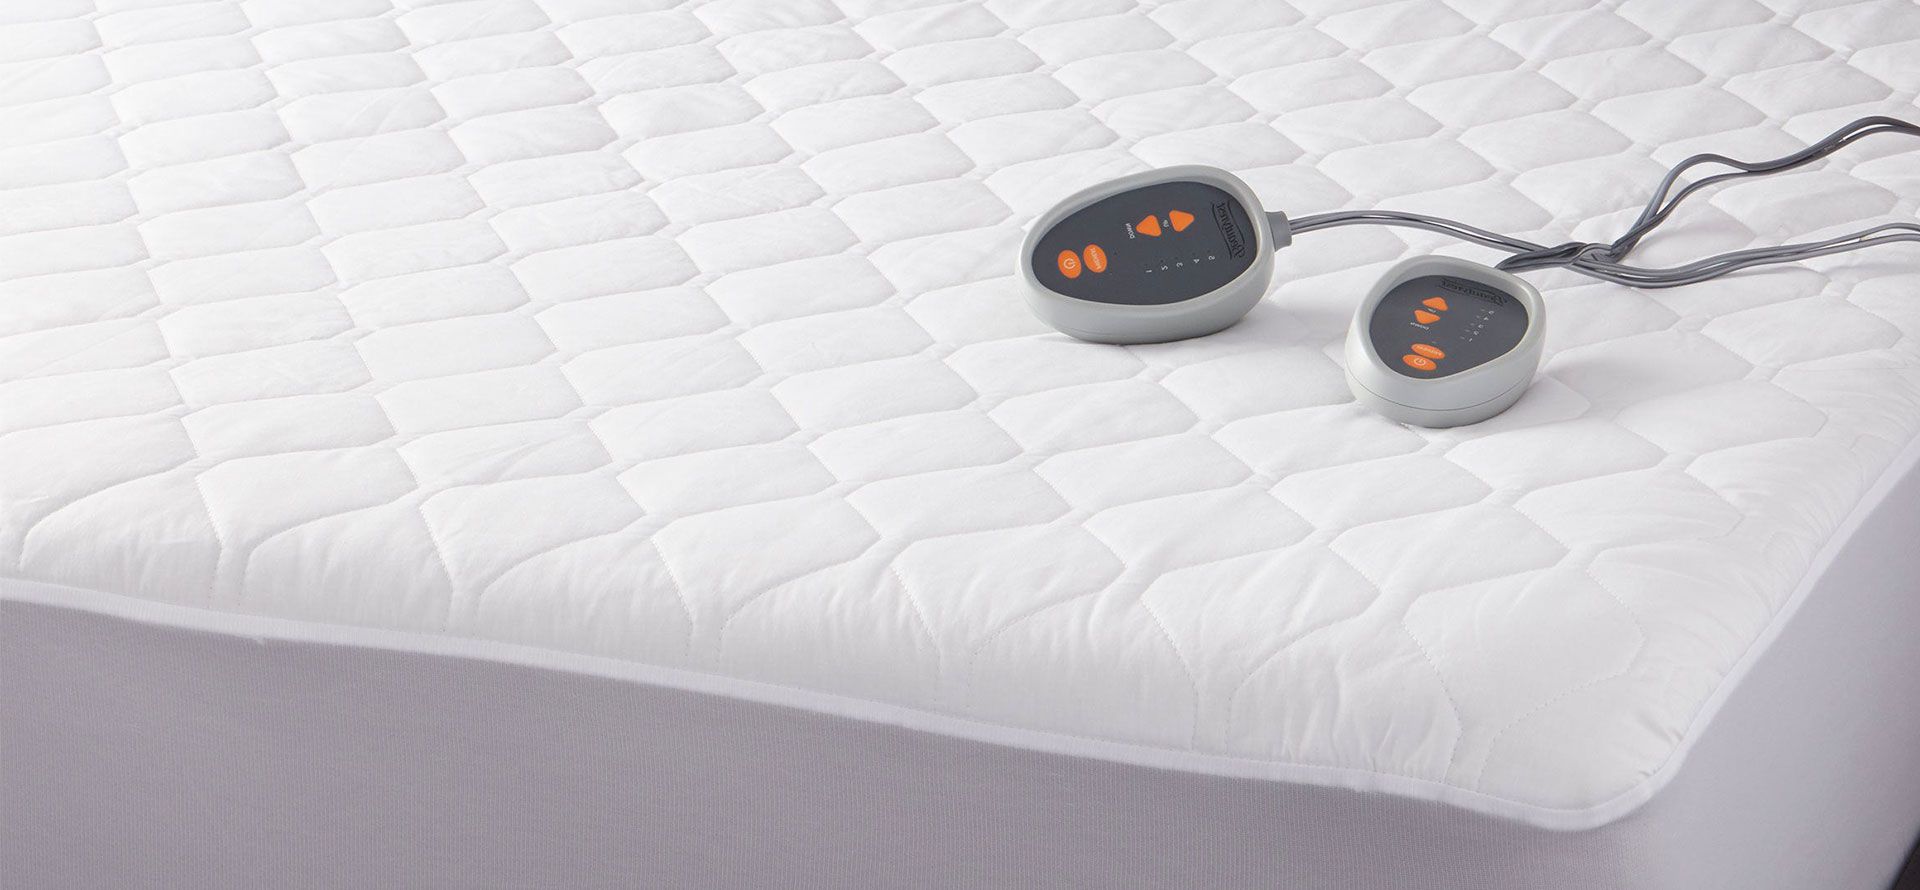 Heated mattress pad temperature controllers.